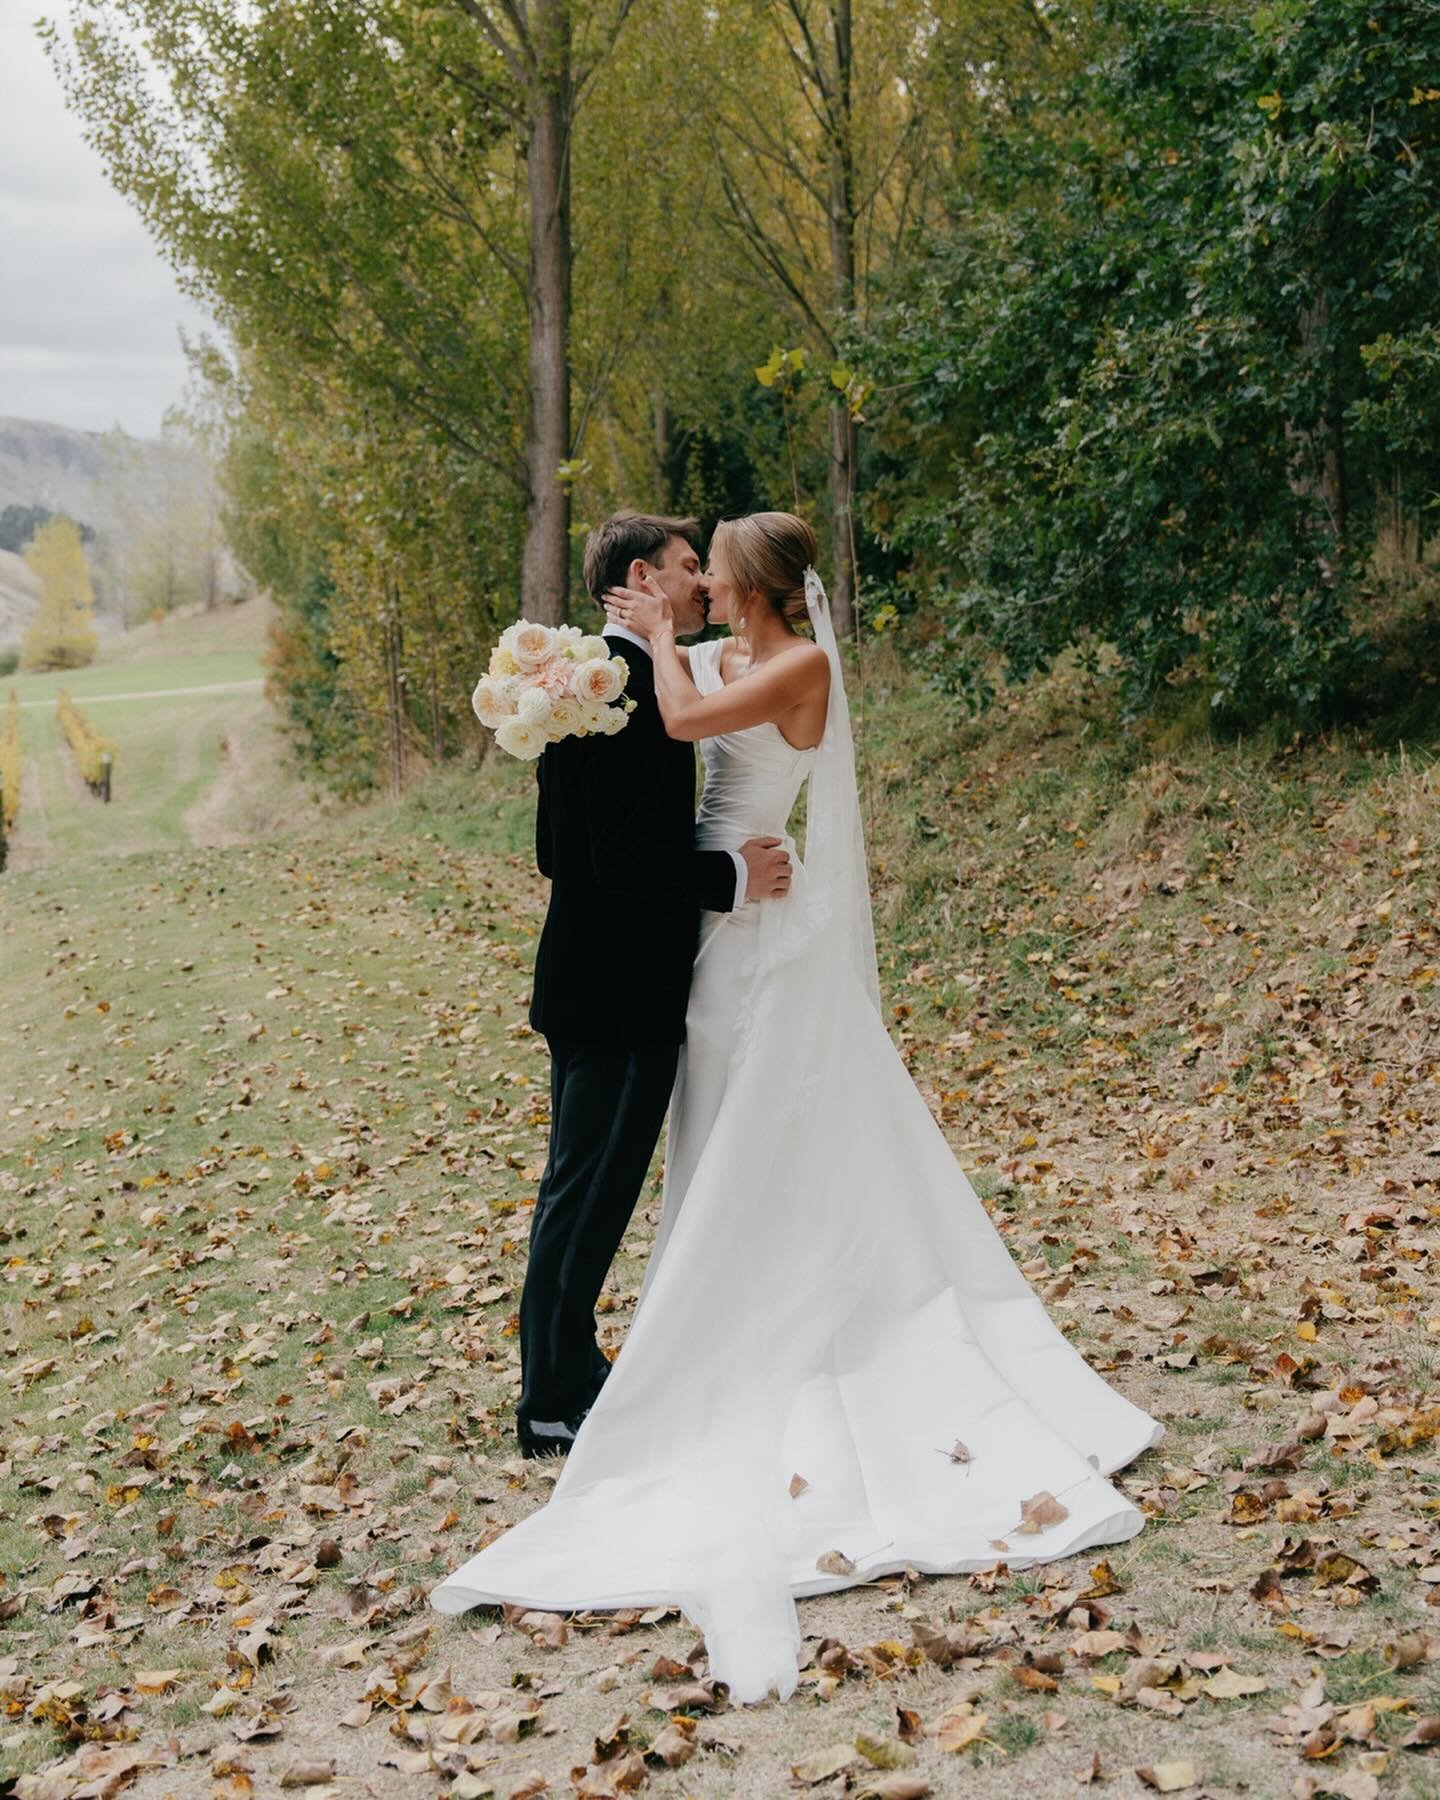 This is the best part 🖤 4 days later and still on a high from Will and Elise&rsquo;s Hawkes Bay celebration surrounded by their nearest and dearest. It truely was an honour to capture this special day

Also 110% here for these autumn colours, what a